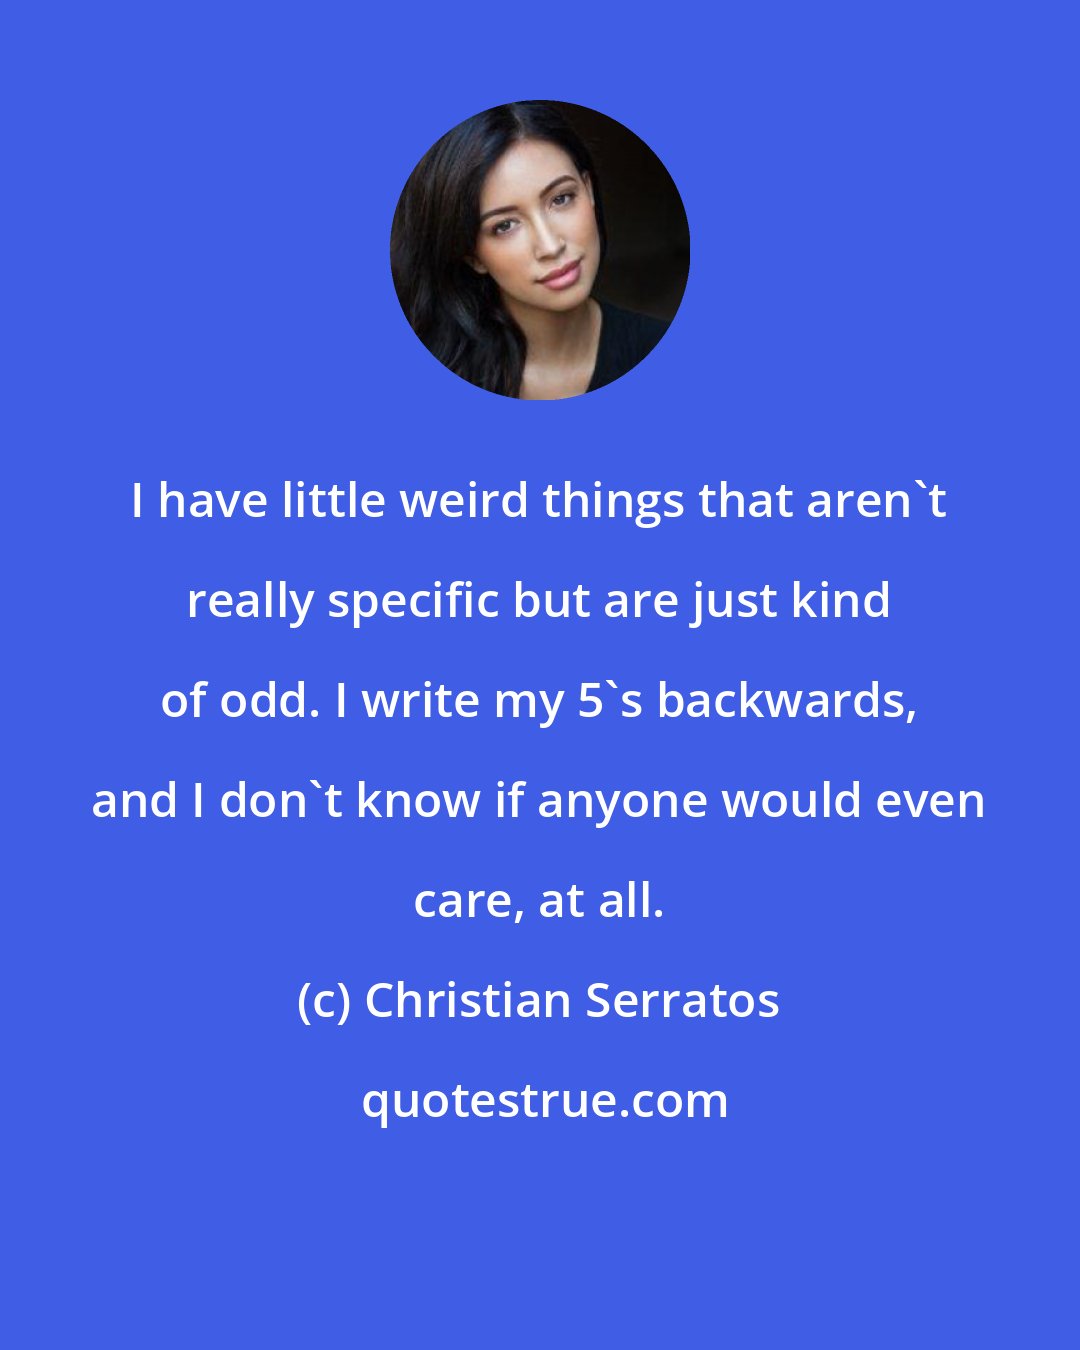 Christian Serratos: I have little weird things that aren't really specific but are just kind of odd. I write my 5's backwards, and I don't know if anyone would even care, at all.